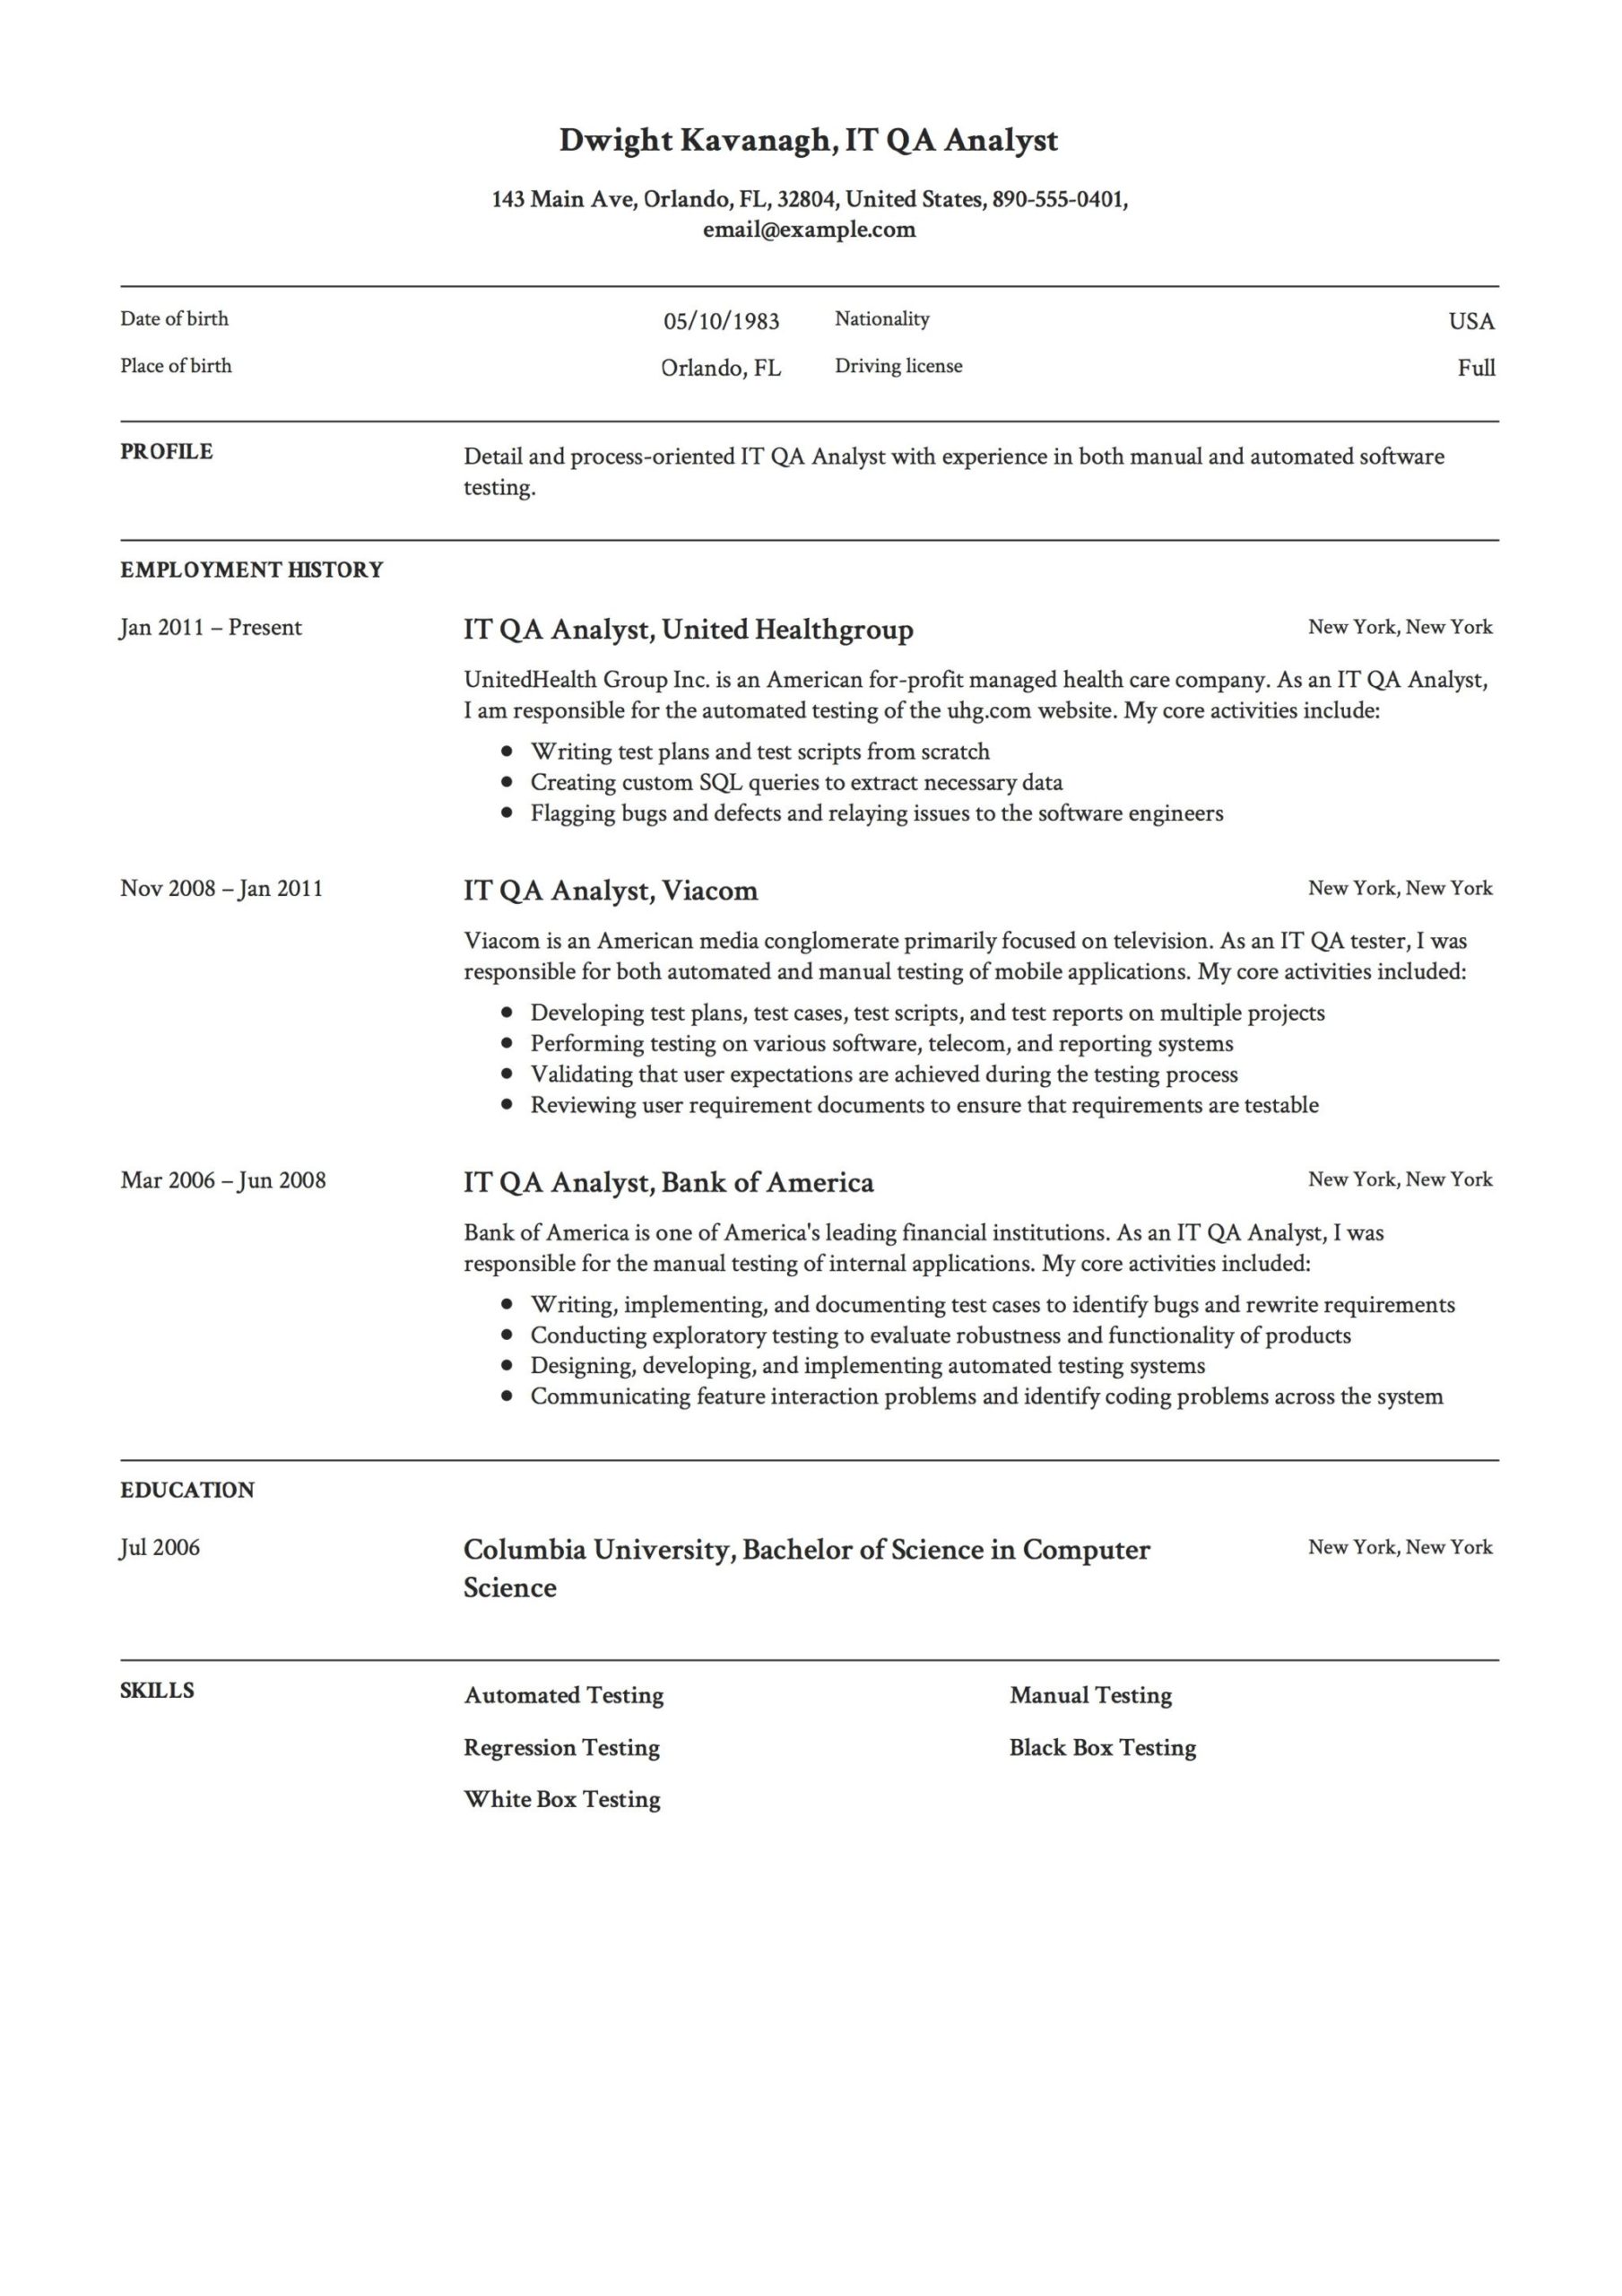 Sample Resumes for Qa Analyst with 3 Years Experience It Qa Analyst Resume & Guide 14 Templates Free